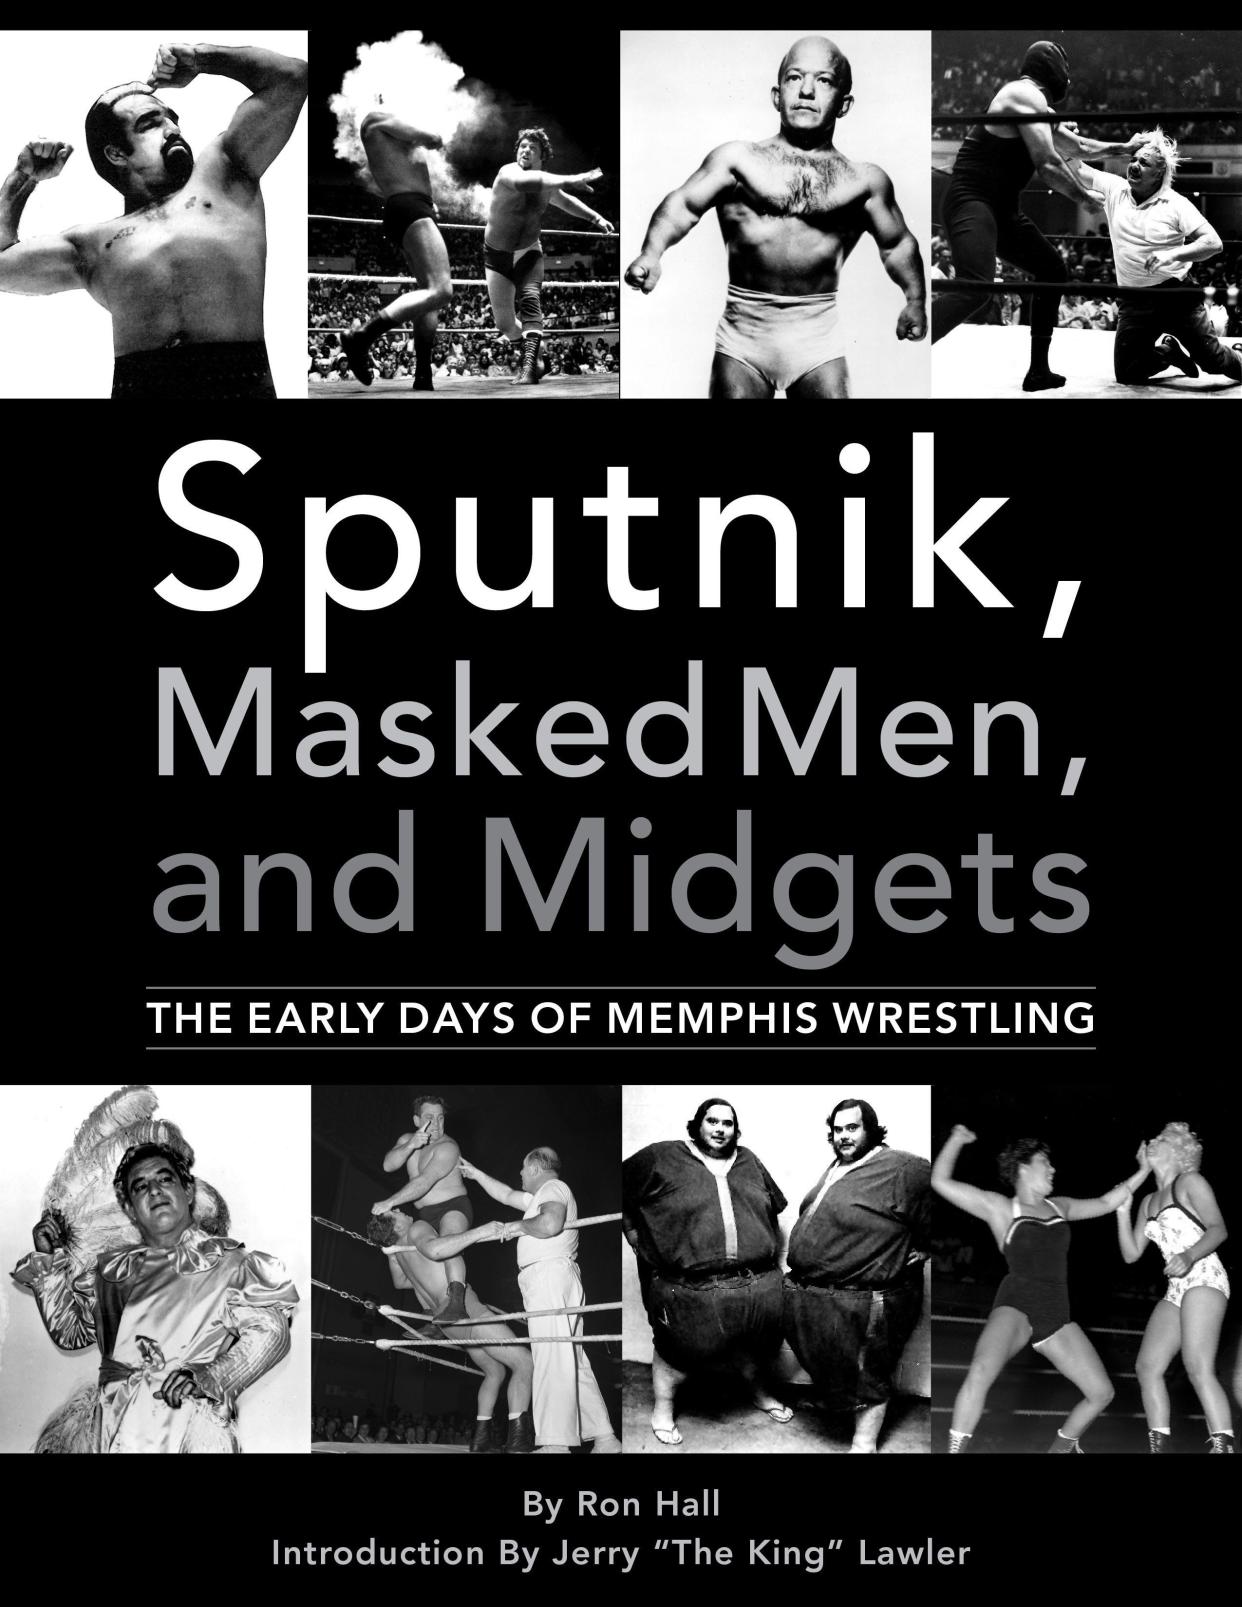 "Sputnik, Masked Men and Midgets: The Early Days of Memphis Wrestling" by Ron Hall